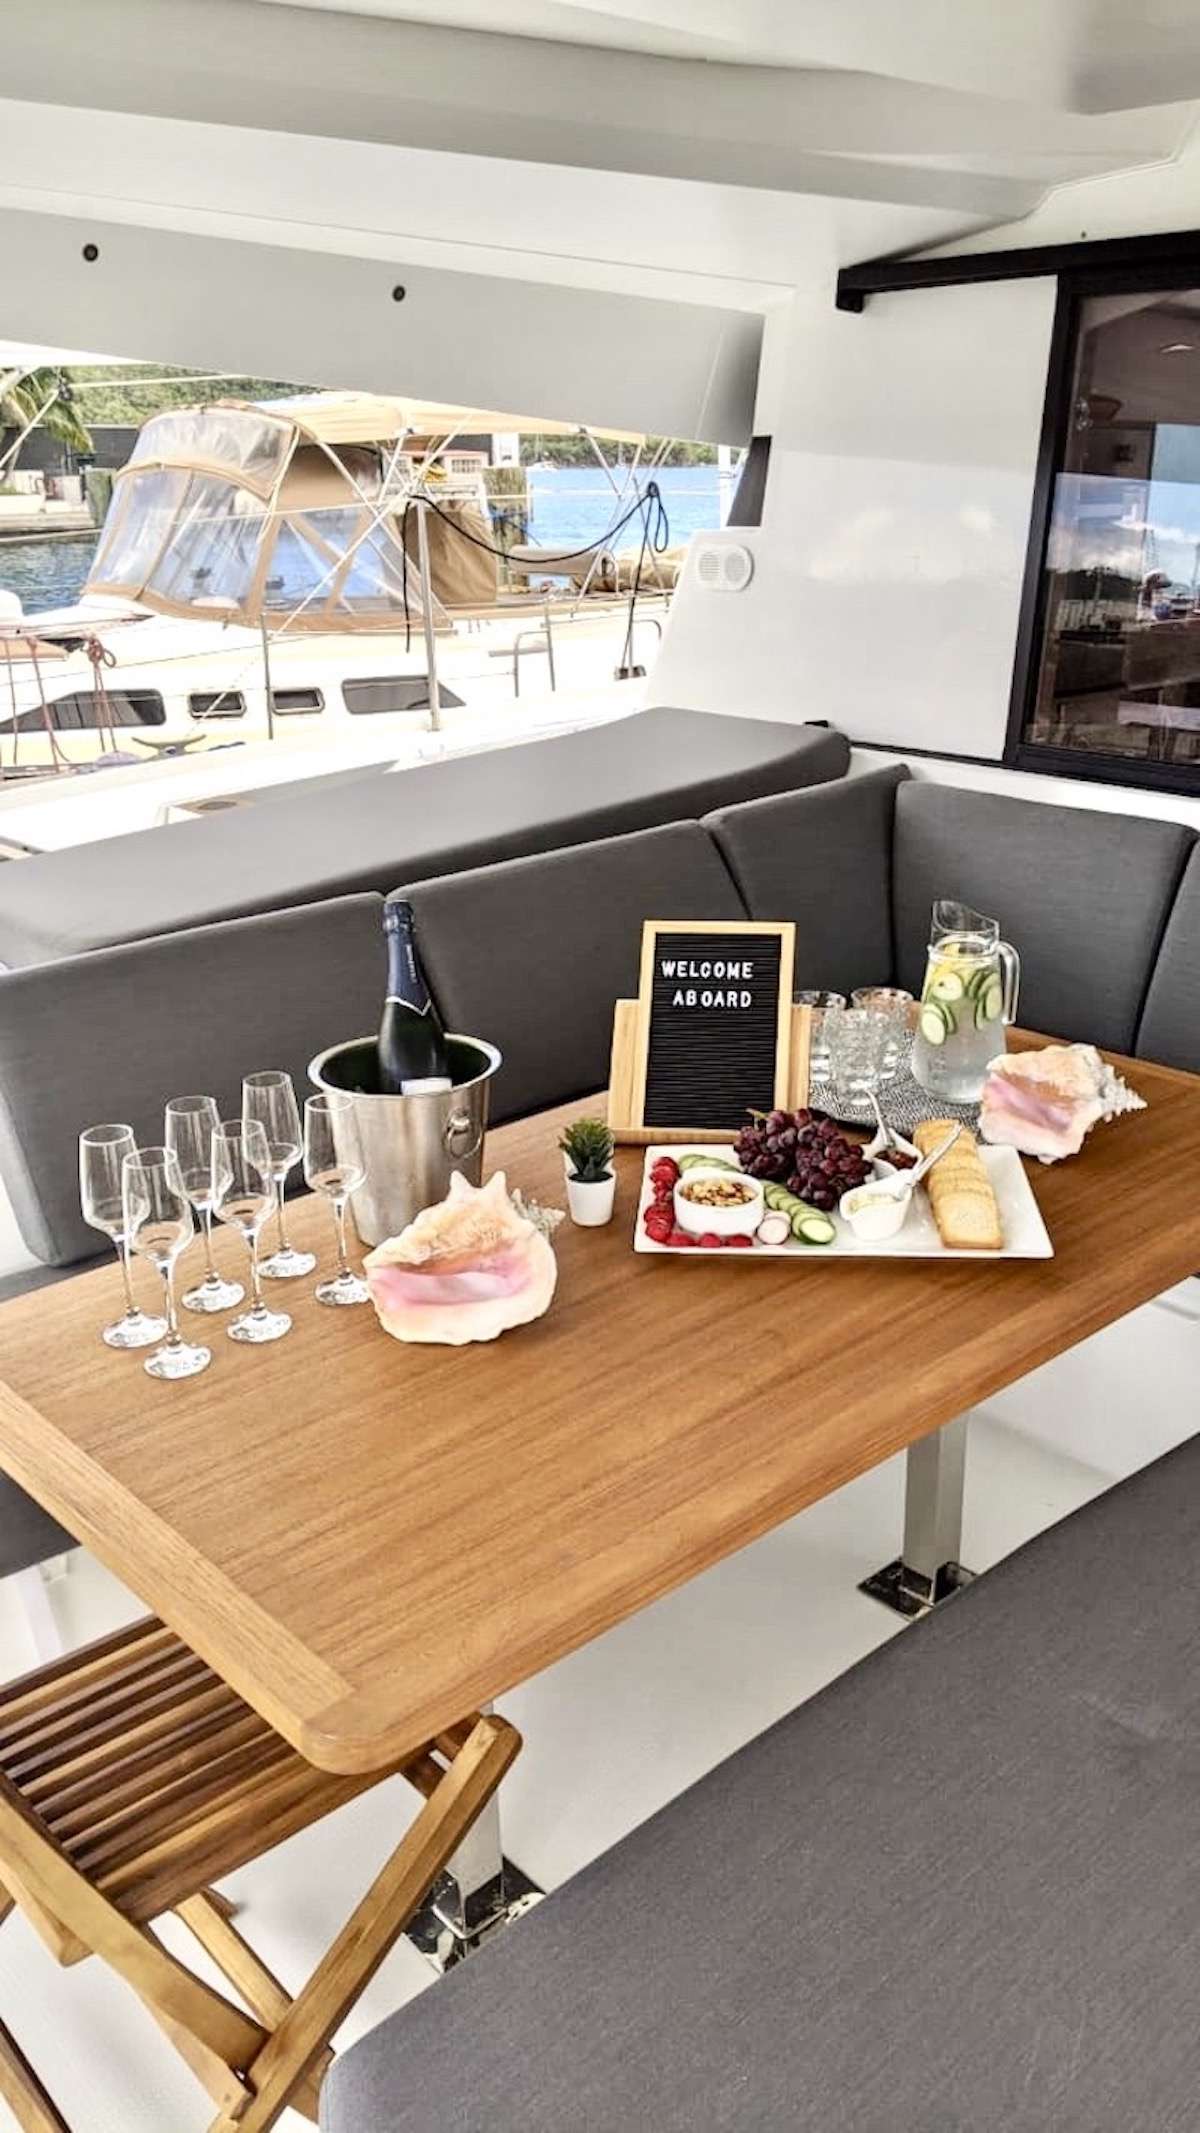 CHAMPAGNE Yacht Charter - Champange from Champagne